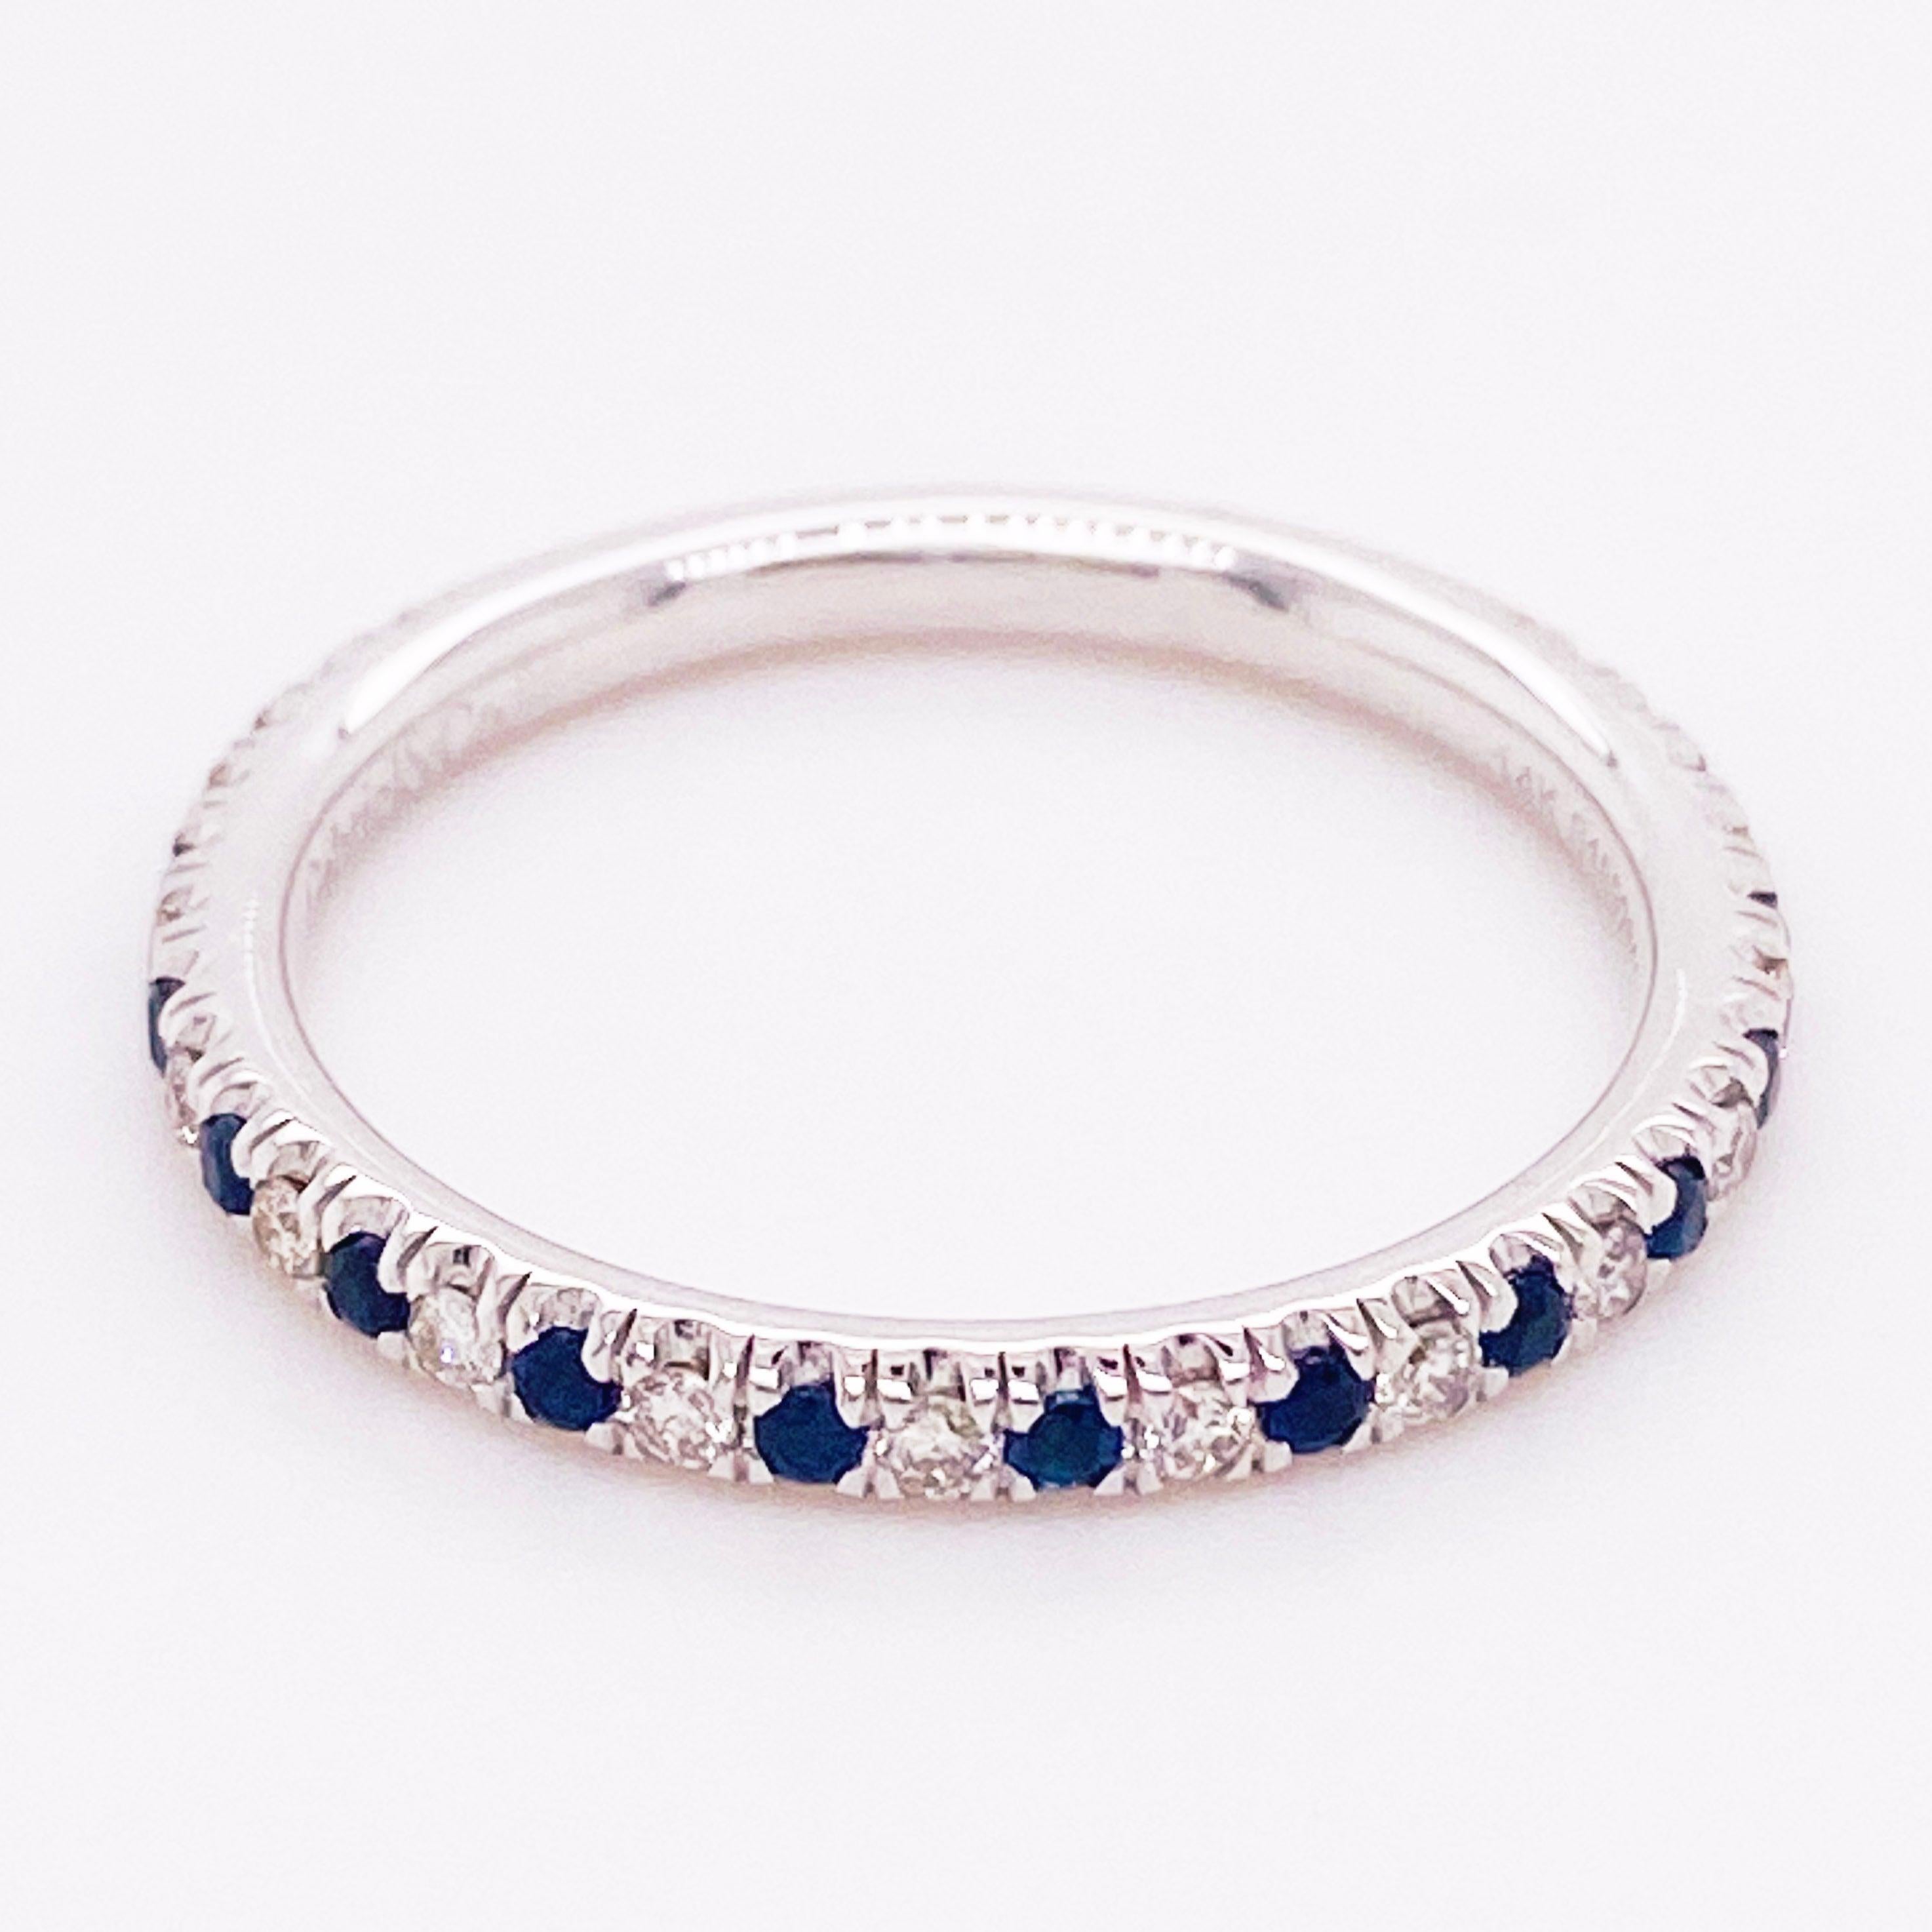 For Sale:  Sapphire Diamond Ring, Blue Sapphire, 14 Kt White Gold, Stackable Band, Classic 3